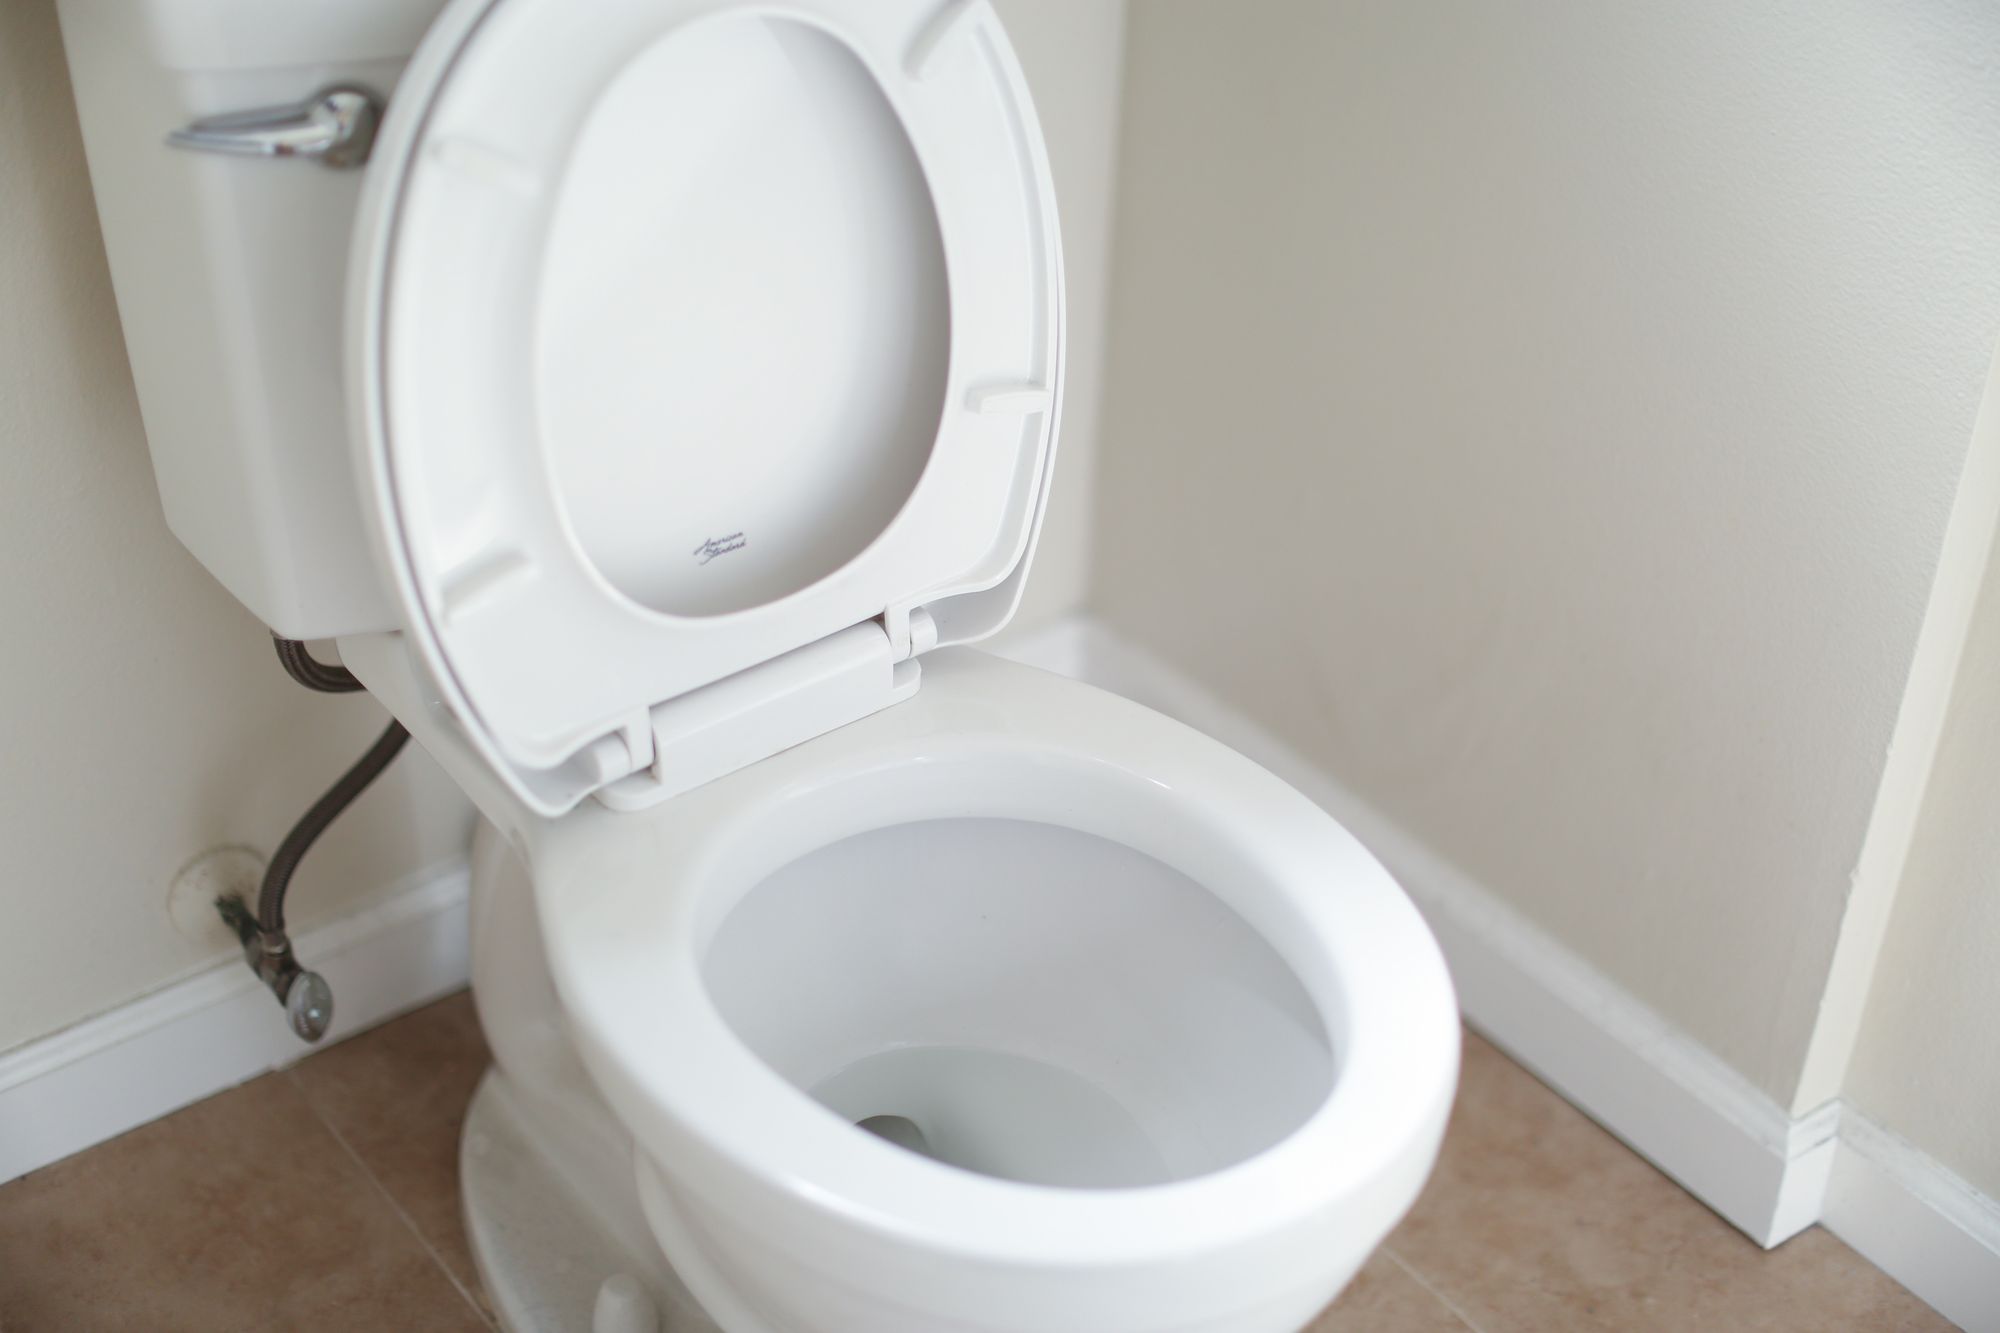 Understanding the Parts of a Toilet